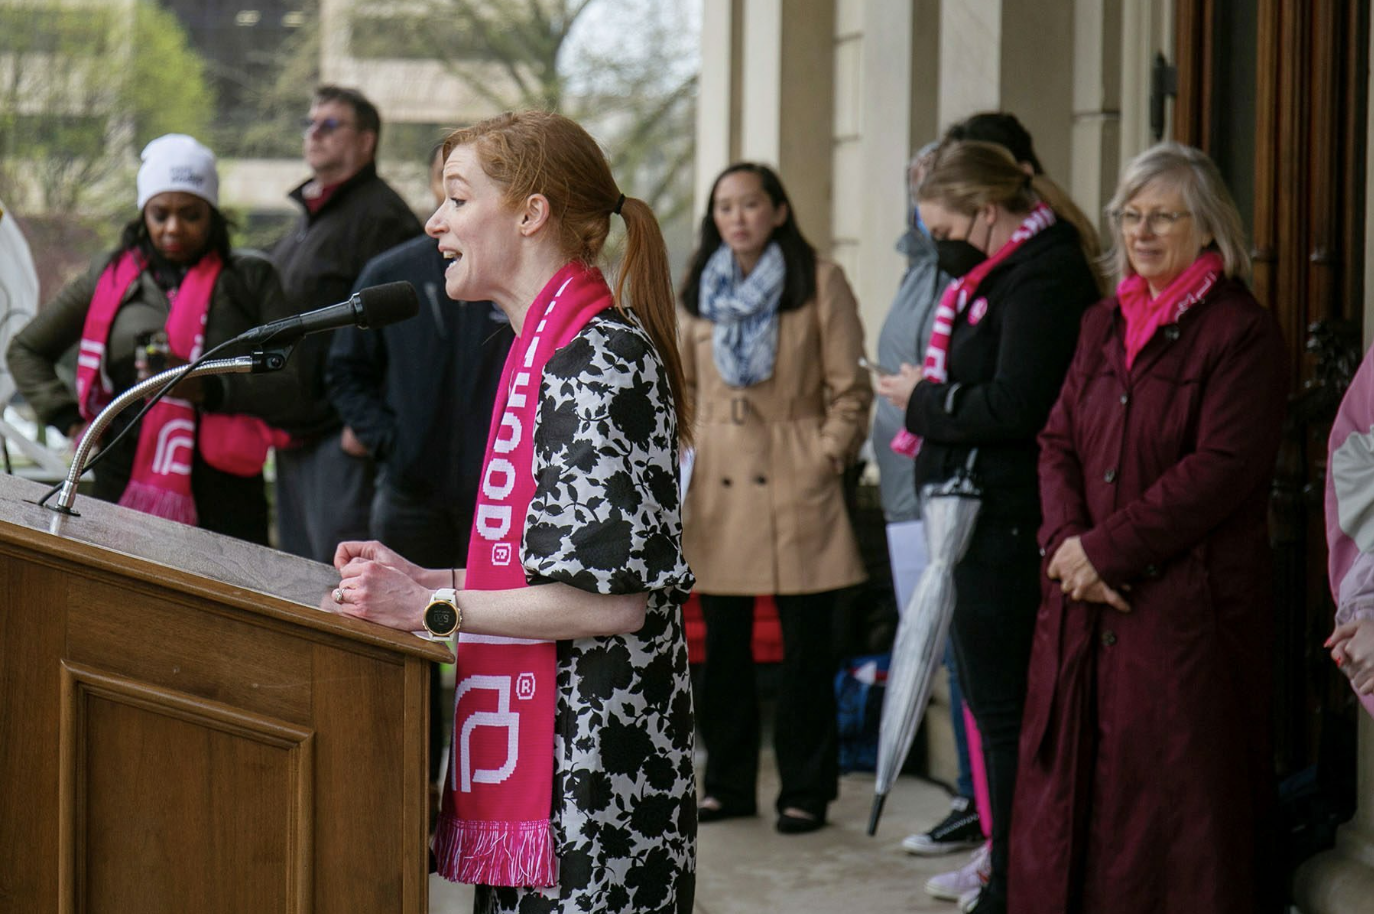 Michigan state Sen. Mallory McMorrow speaks at a rally organized by Planned Parenthood Michigan on the steps of the Michigan State Capitol building in May 2022. (DANIEL SHULAR/THE GRAND RAPIDS/AP)